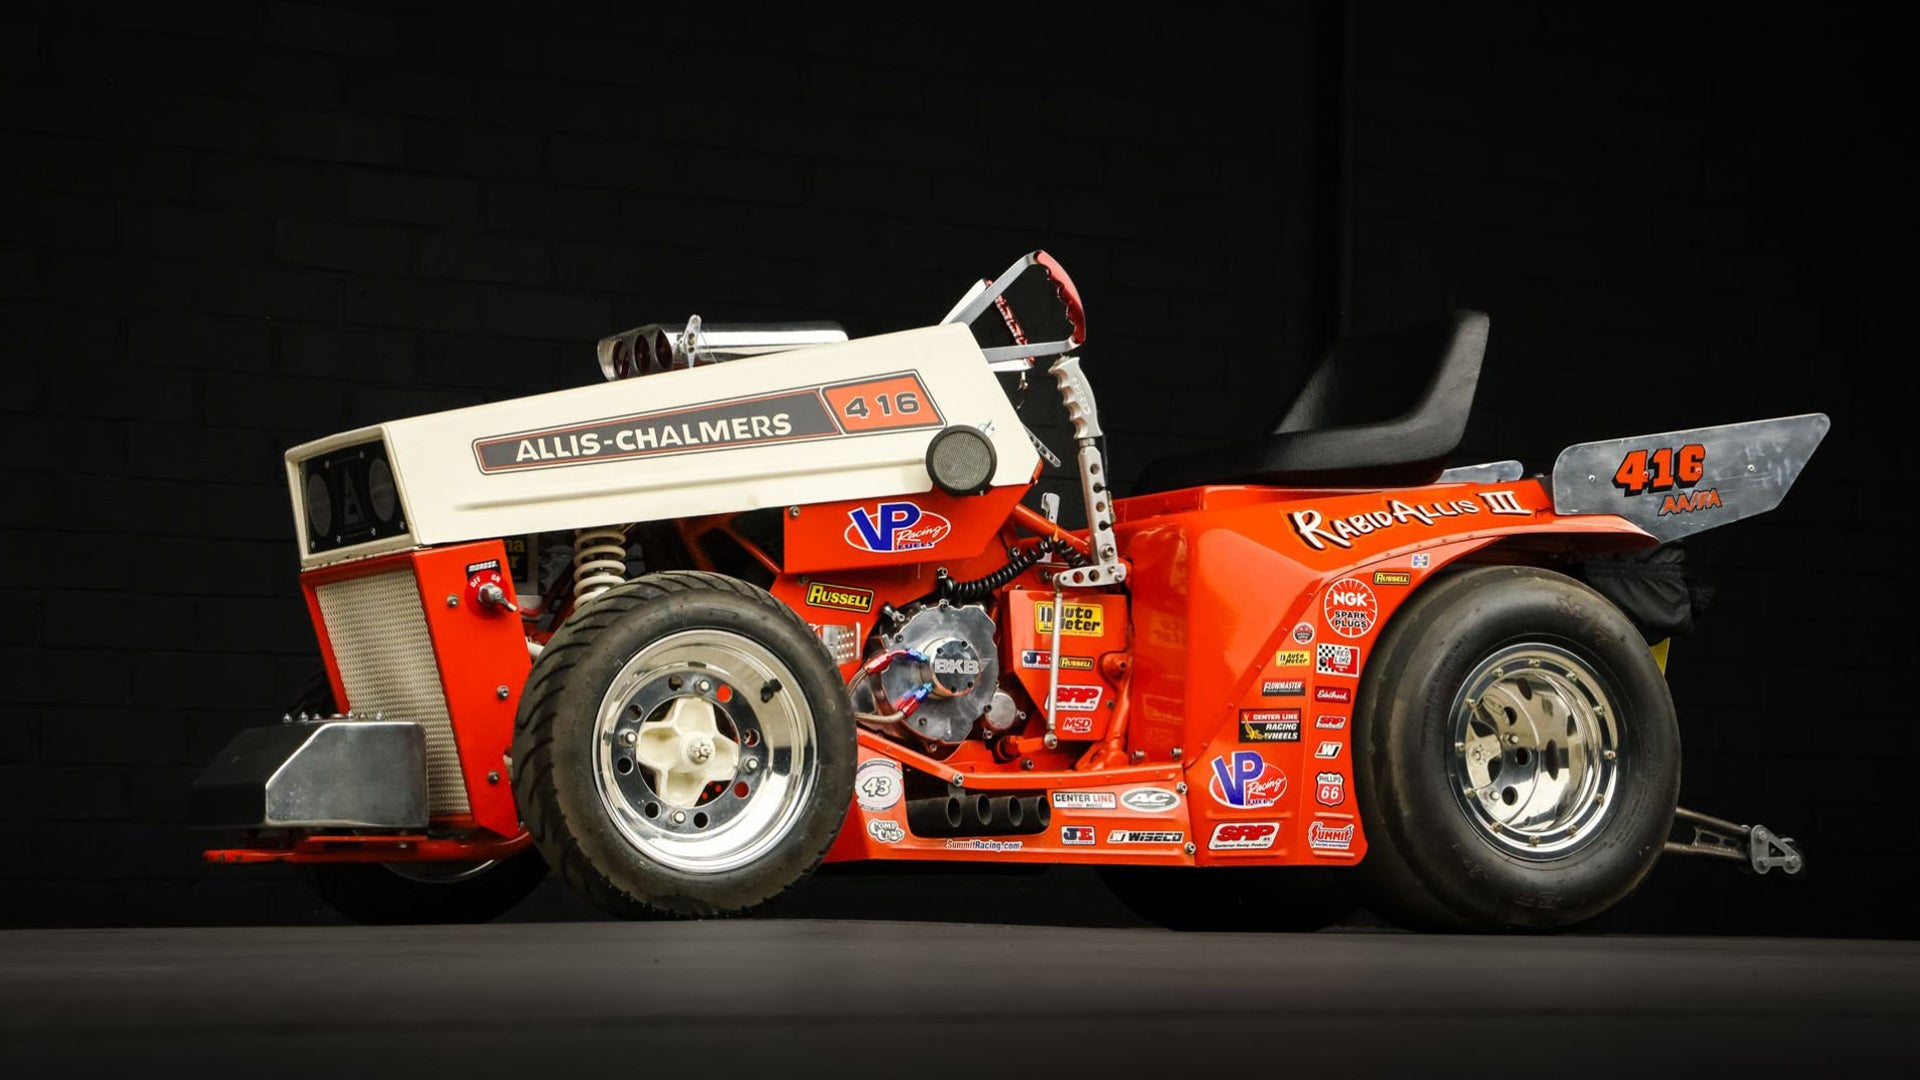 The Allis-Chalmers lawn dragster is powered by nitromethane and produces ear-splitting screams as it races.